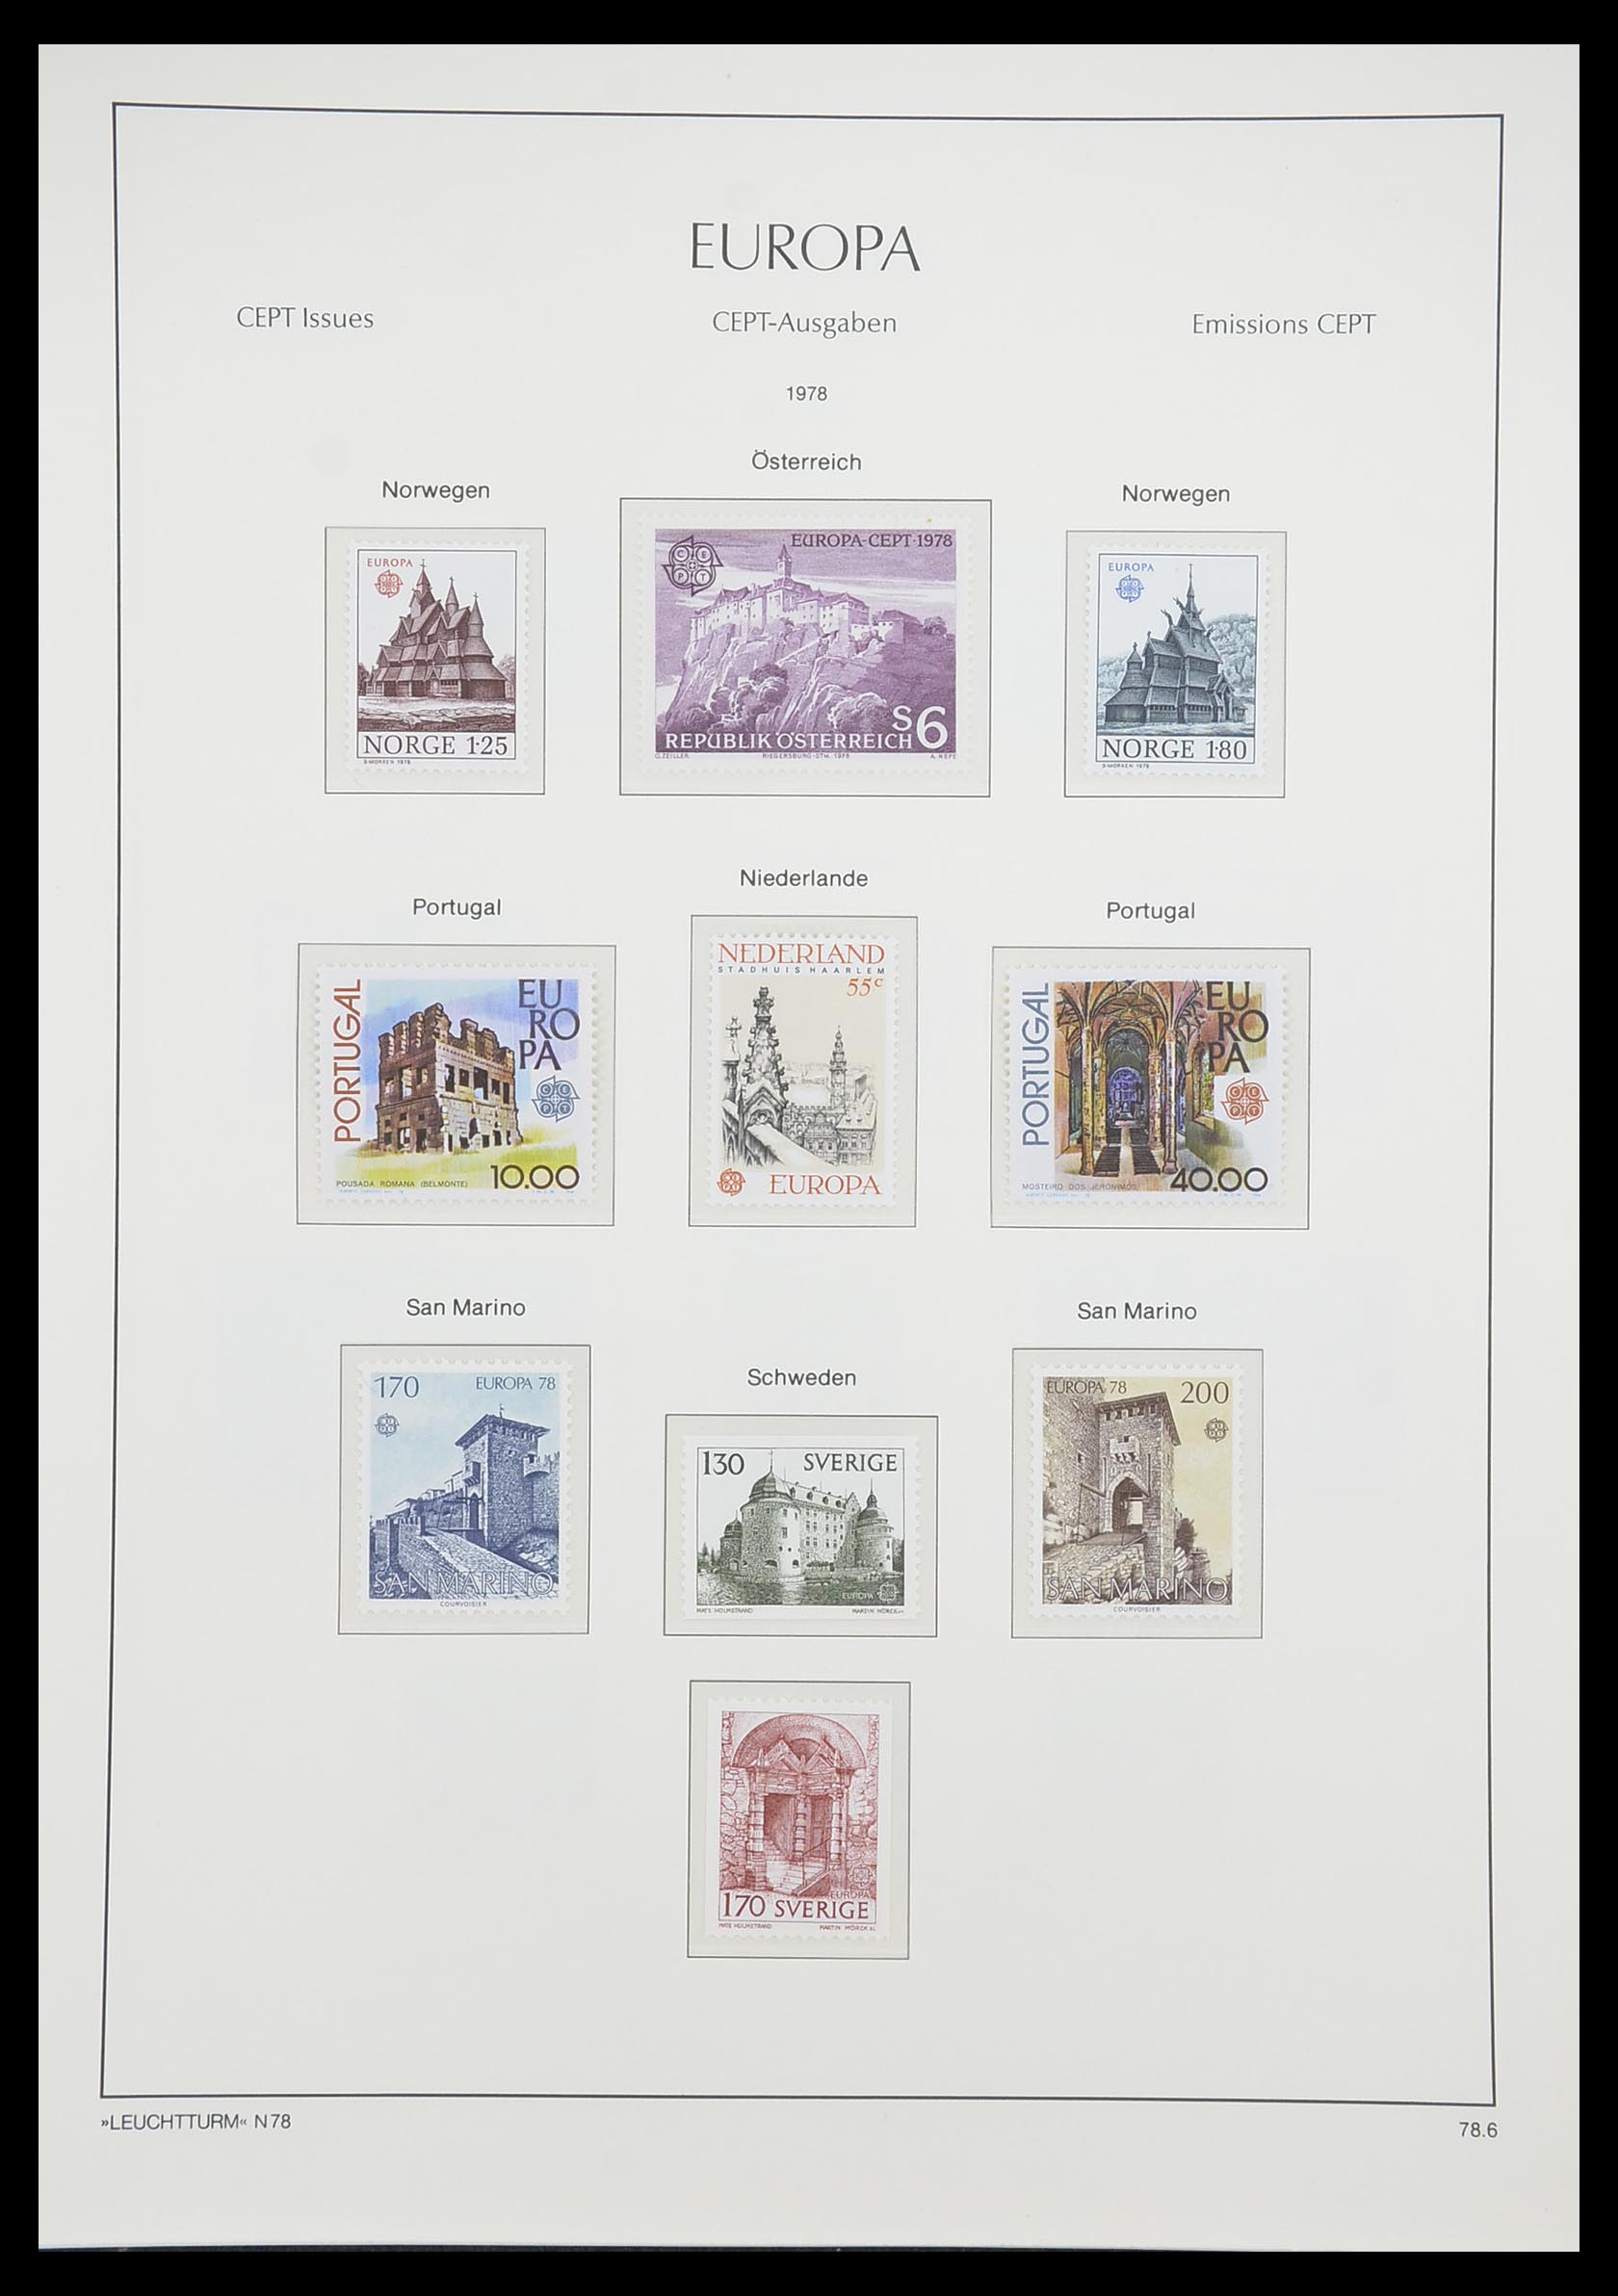 33339 094 - Stamp collection 33339 Europa CEPT 1956-1990.